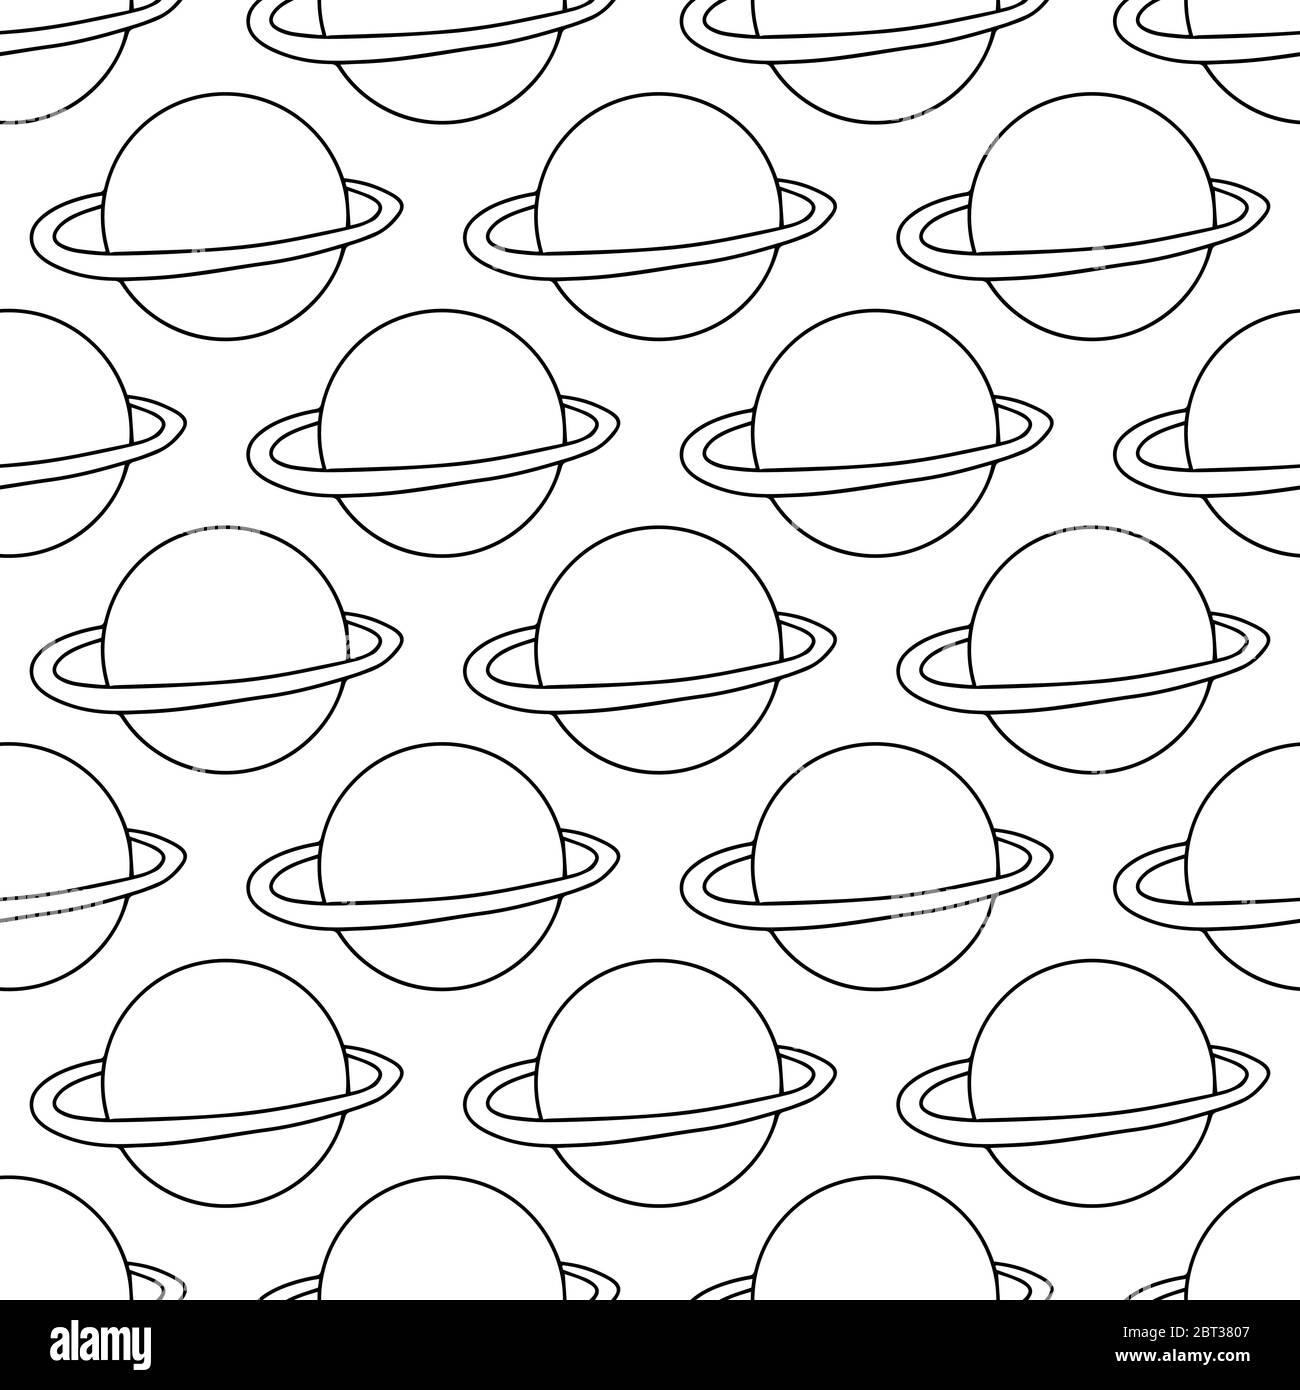 Seamless pattern made from doodle saturn planet. Isolated on white background. Vector stock illustration. Stock Vector